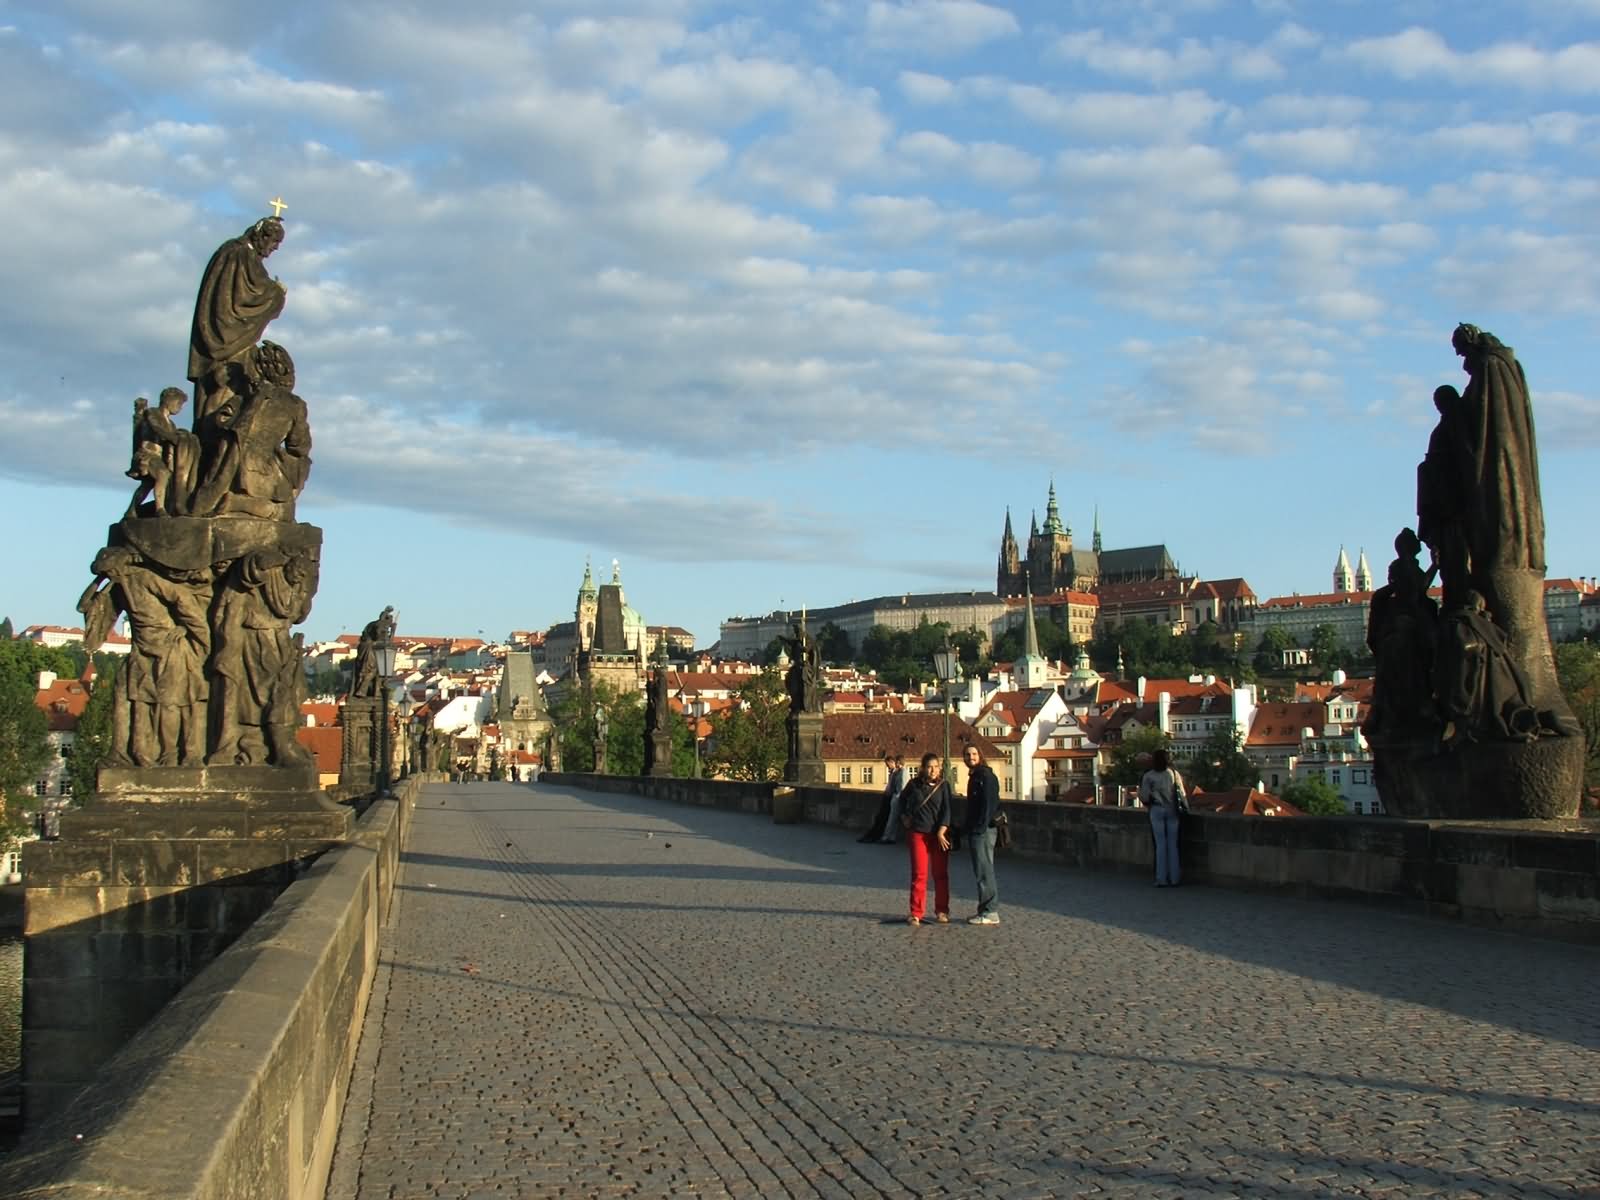 Morning View Of The Charles Bridge